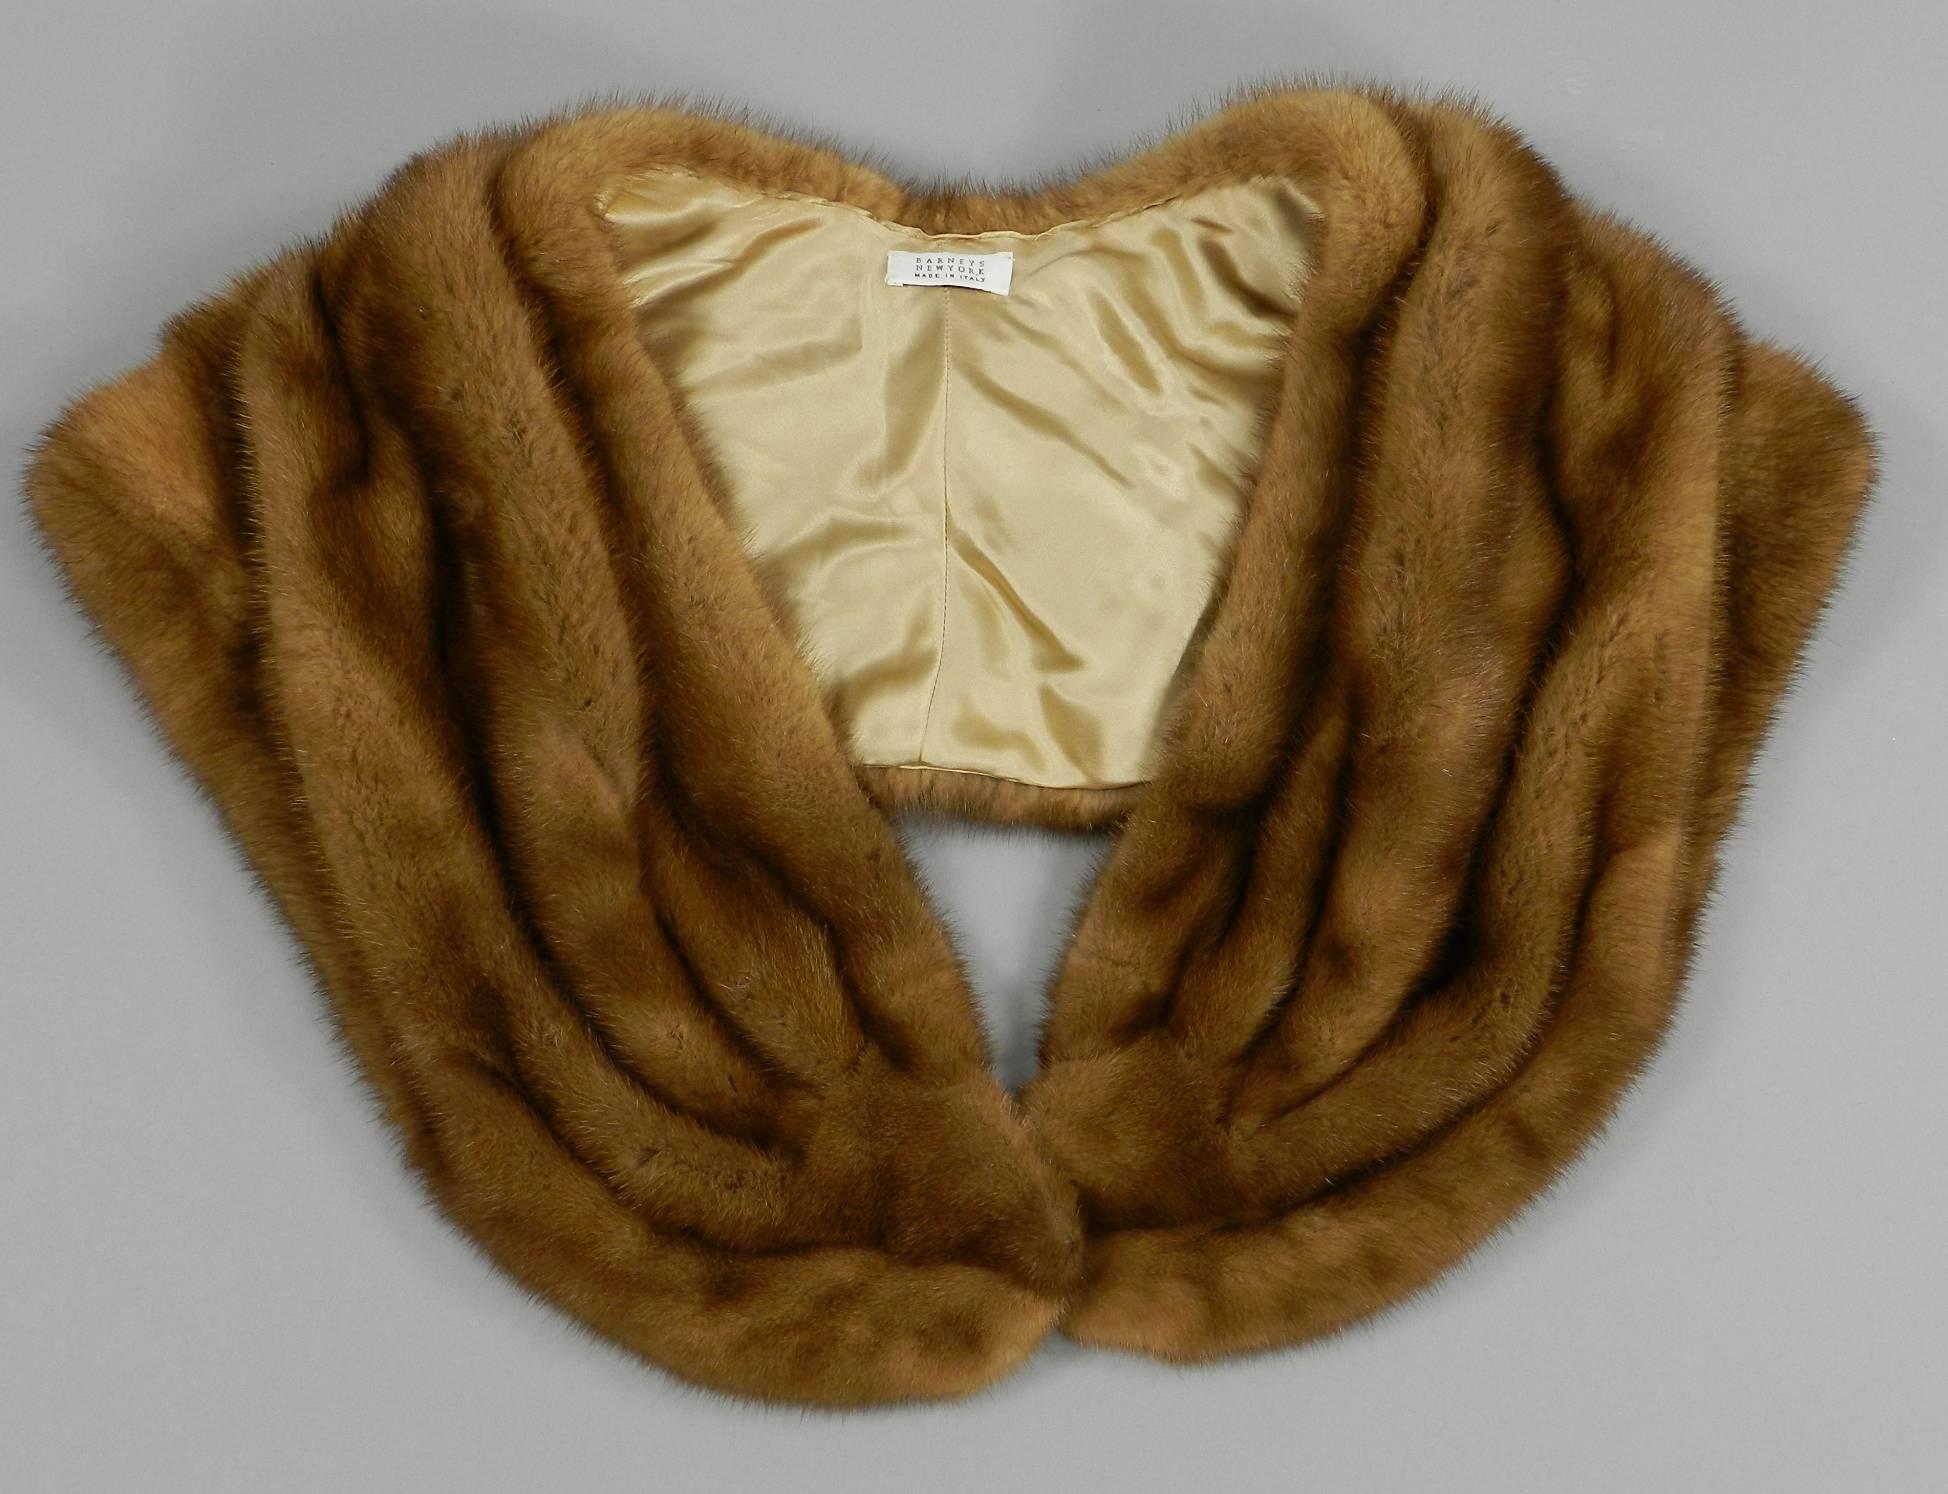 Barneys New York natural mink shawl / capelet. Excellent fur condition. Lined with silk satin. Made in Italy.

Shipping prices provided are for tracked Ground shipping to the US. Yes we ship to International, Canada, and can also quote for faster